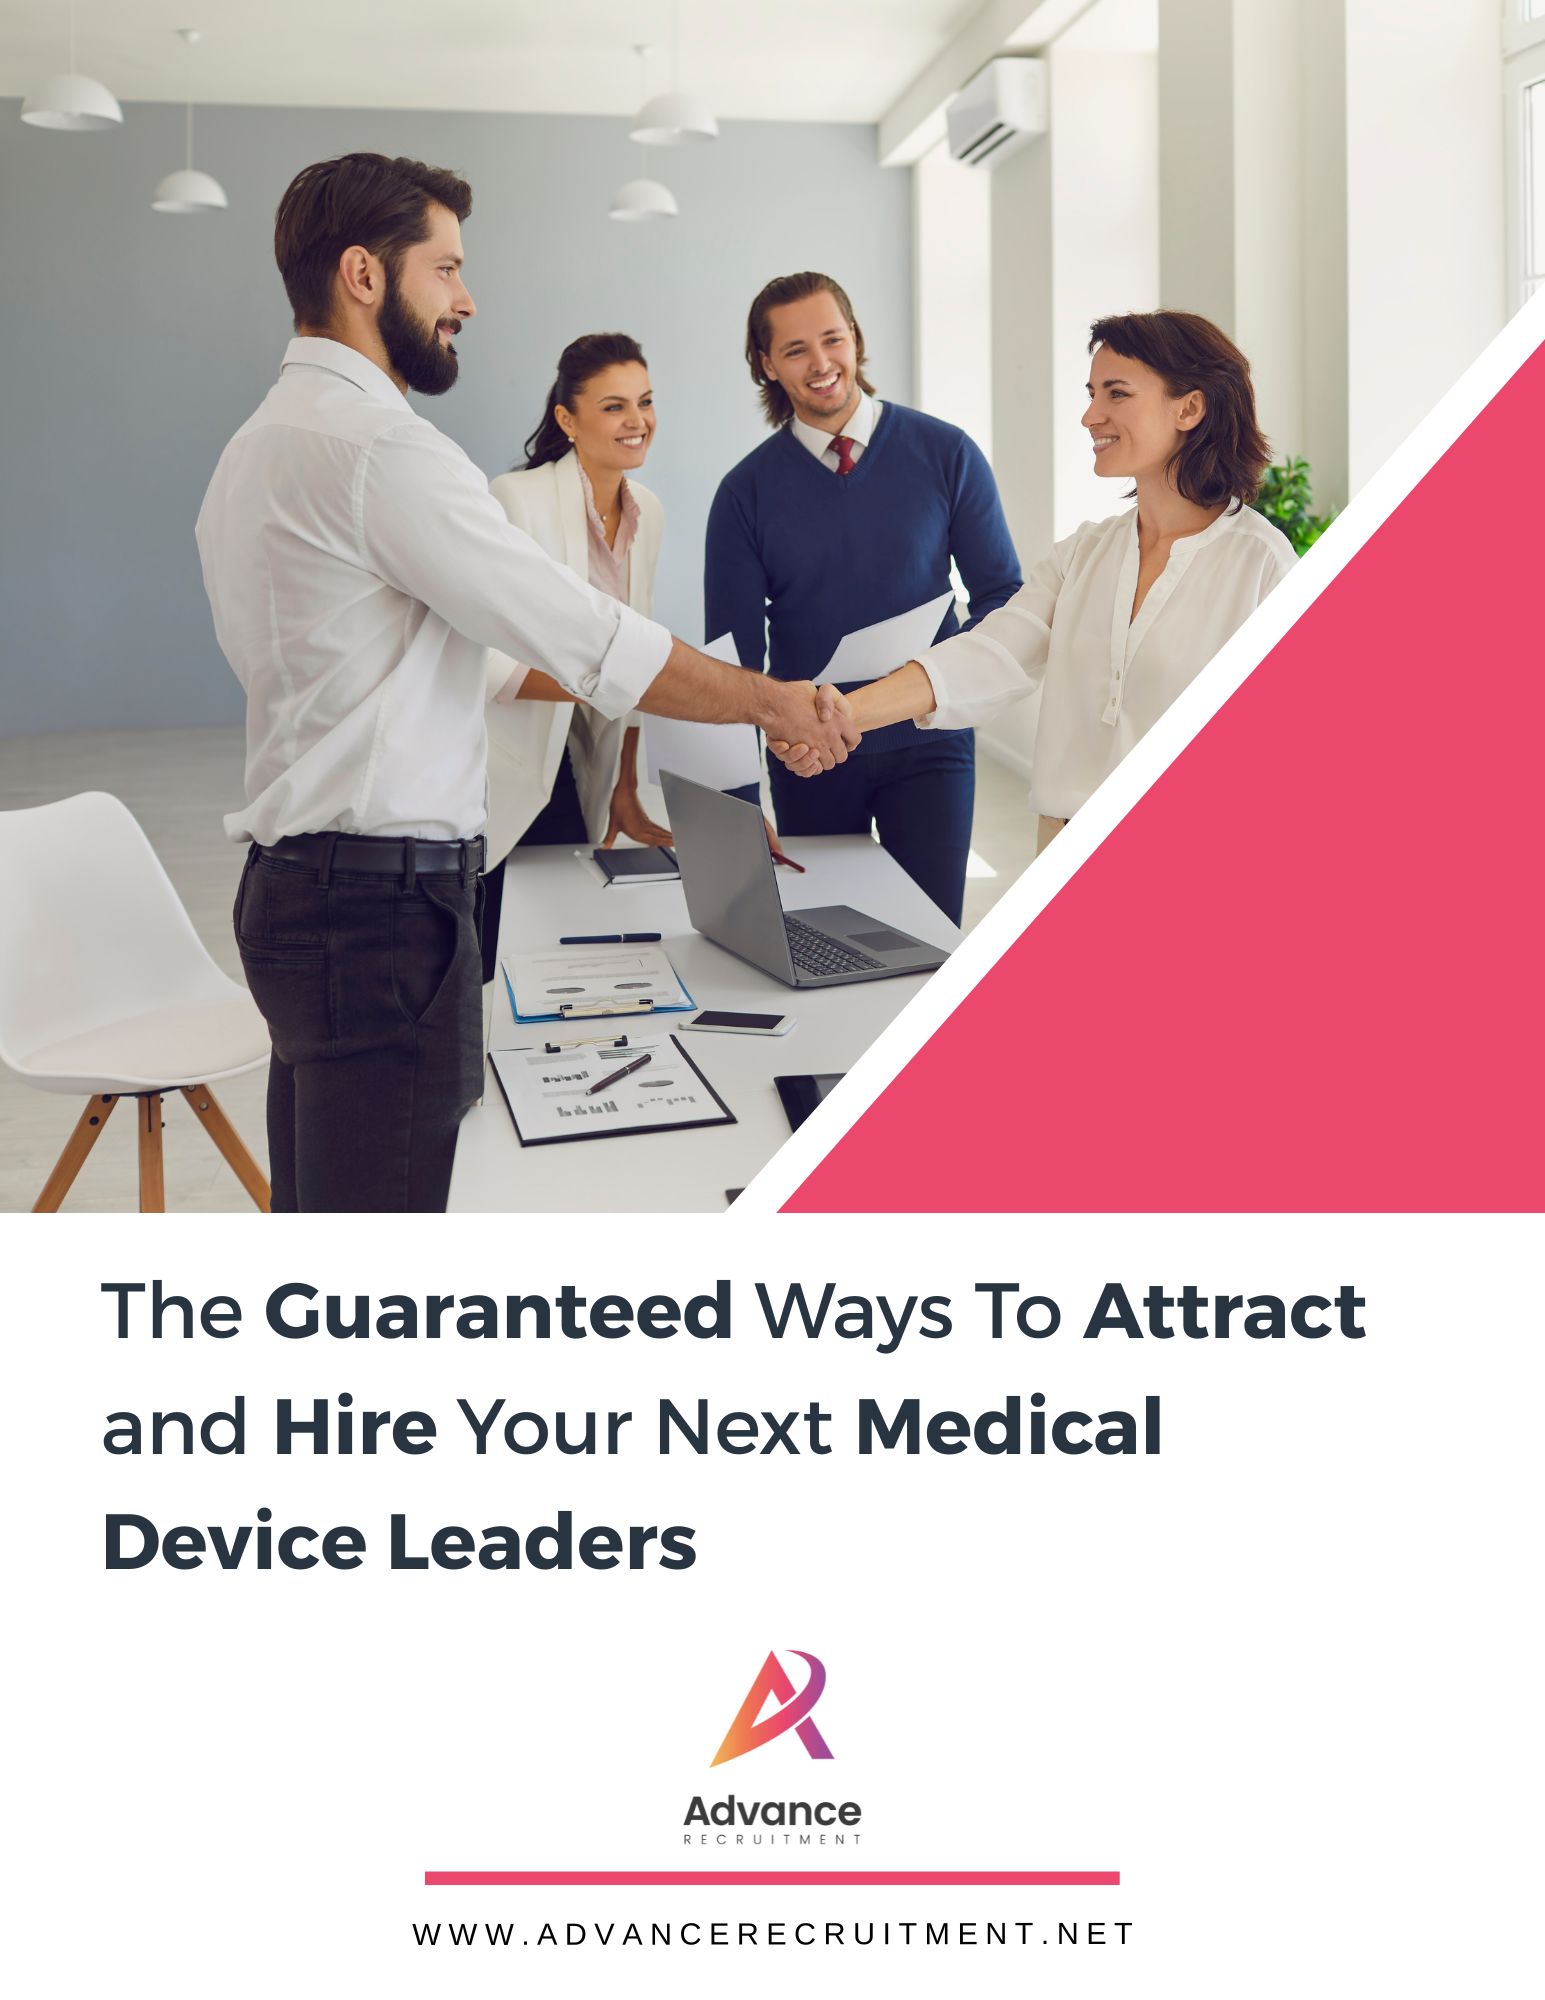 The Guaranteed Way to Attract and Hire Your Next Medical Device Leaders